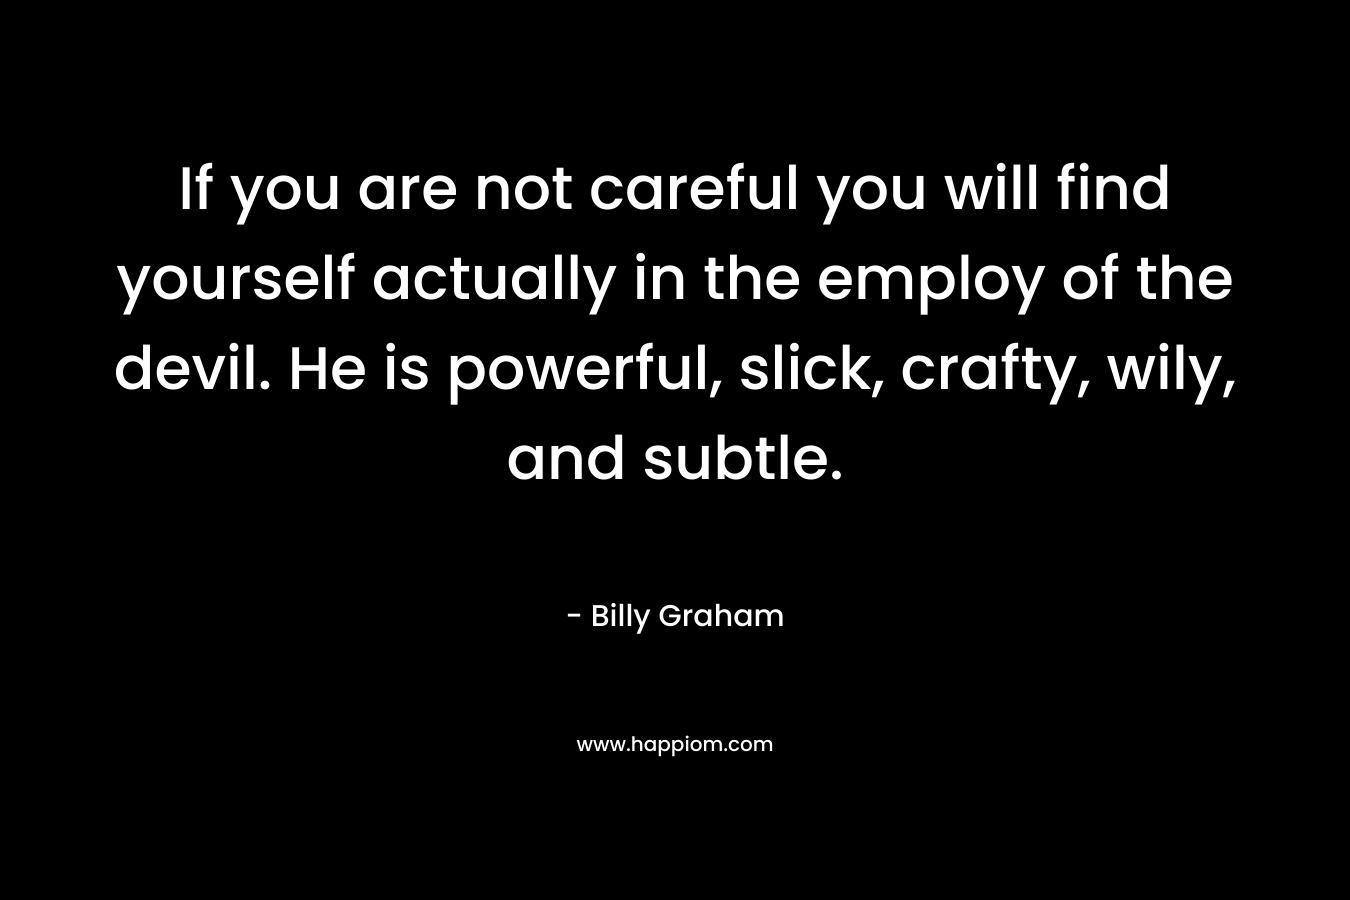 If you are not careful you will find yourself actually in the employ of the devil. He is powerful, slick, crafty, wily, and subtle. – Billy Graham